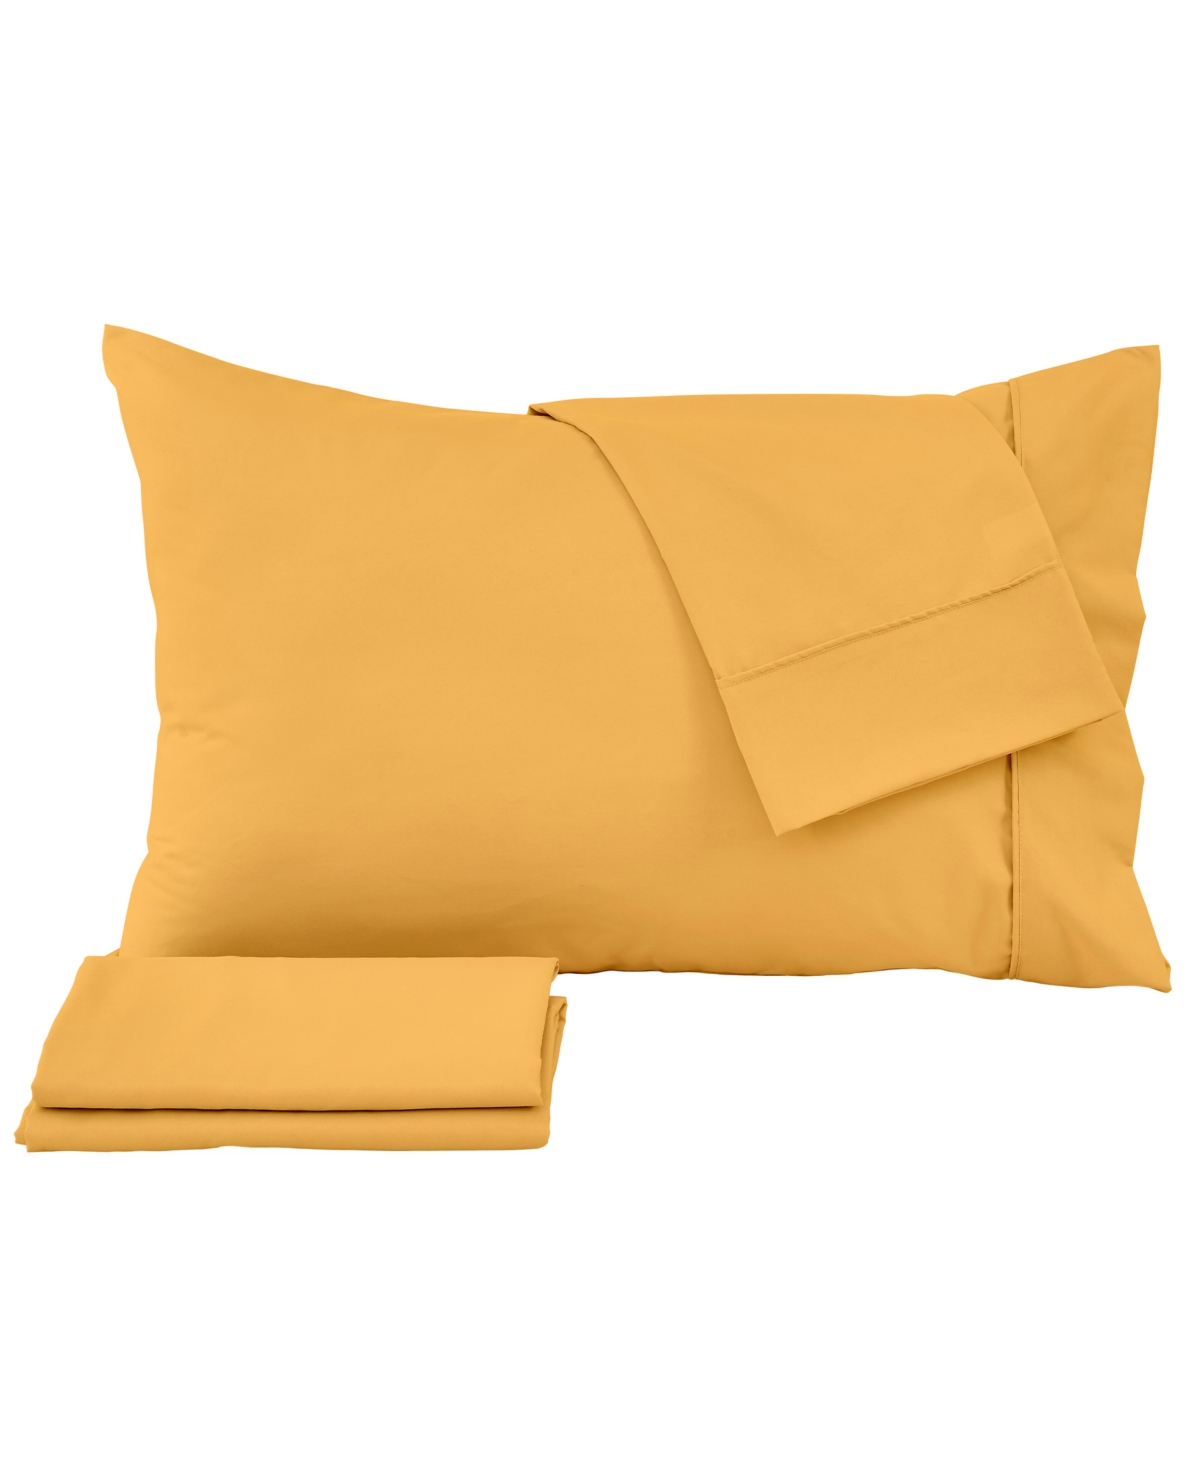 Premium Comforts Solid Microfiber Ultra Soft 3 Piece Sheet Set, Twin In Ginger